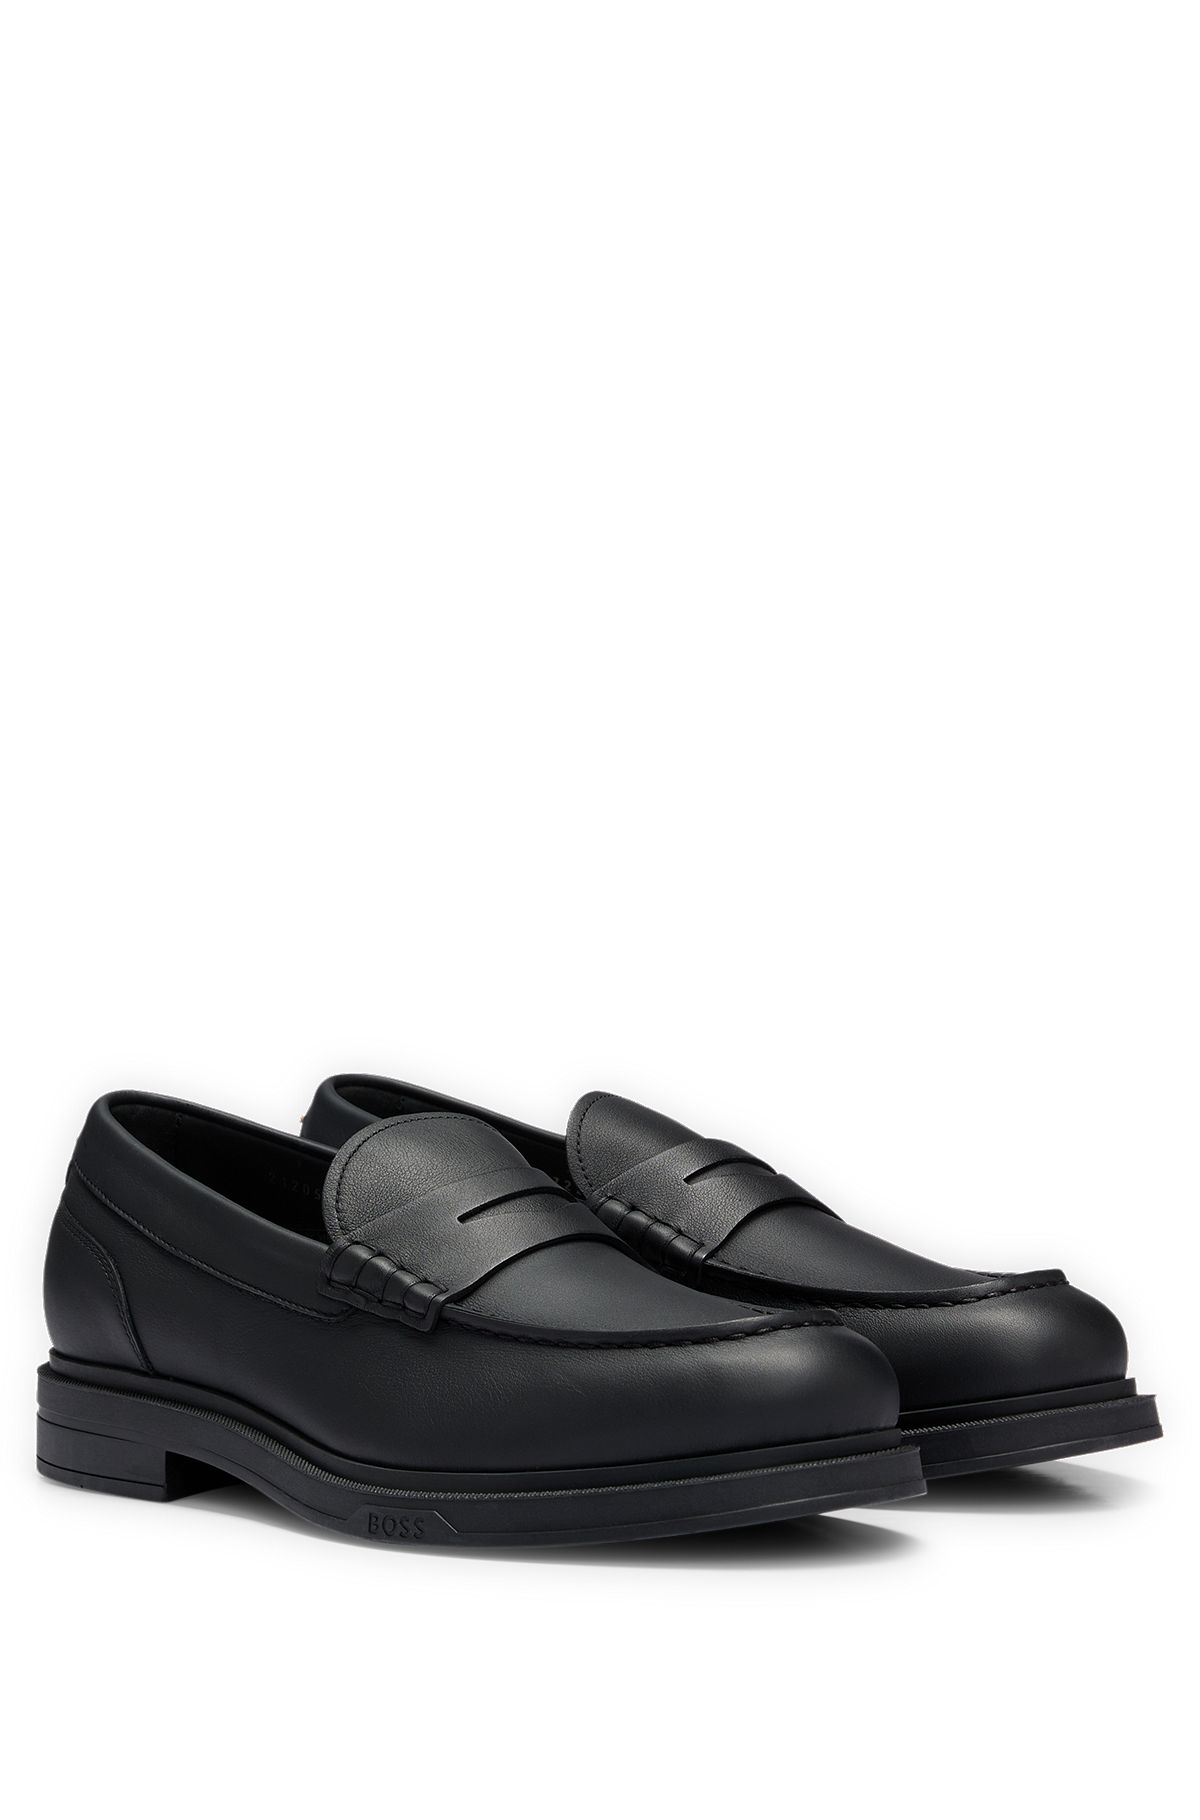 Italian leather loafers with signature-stripe detail, Black